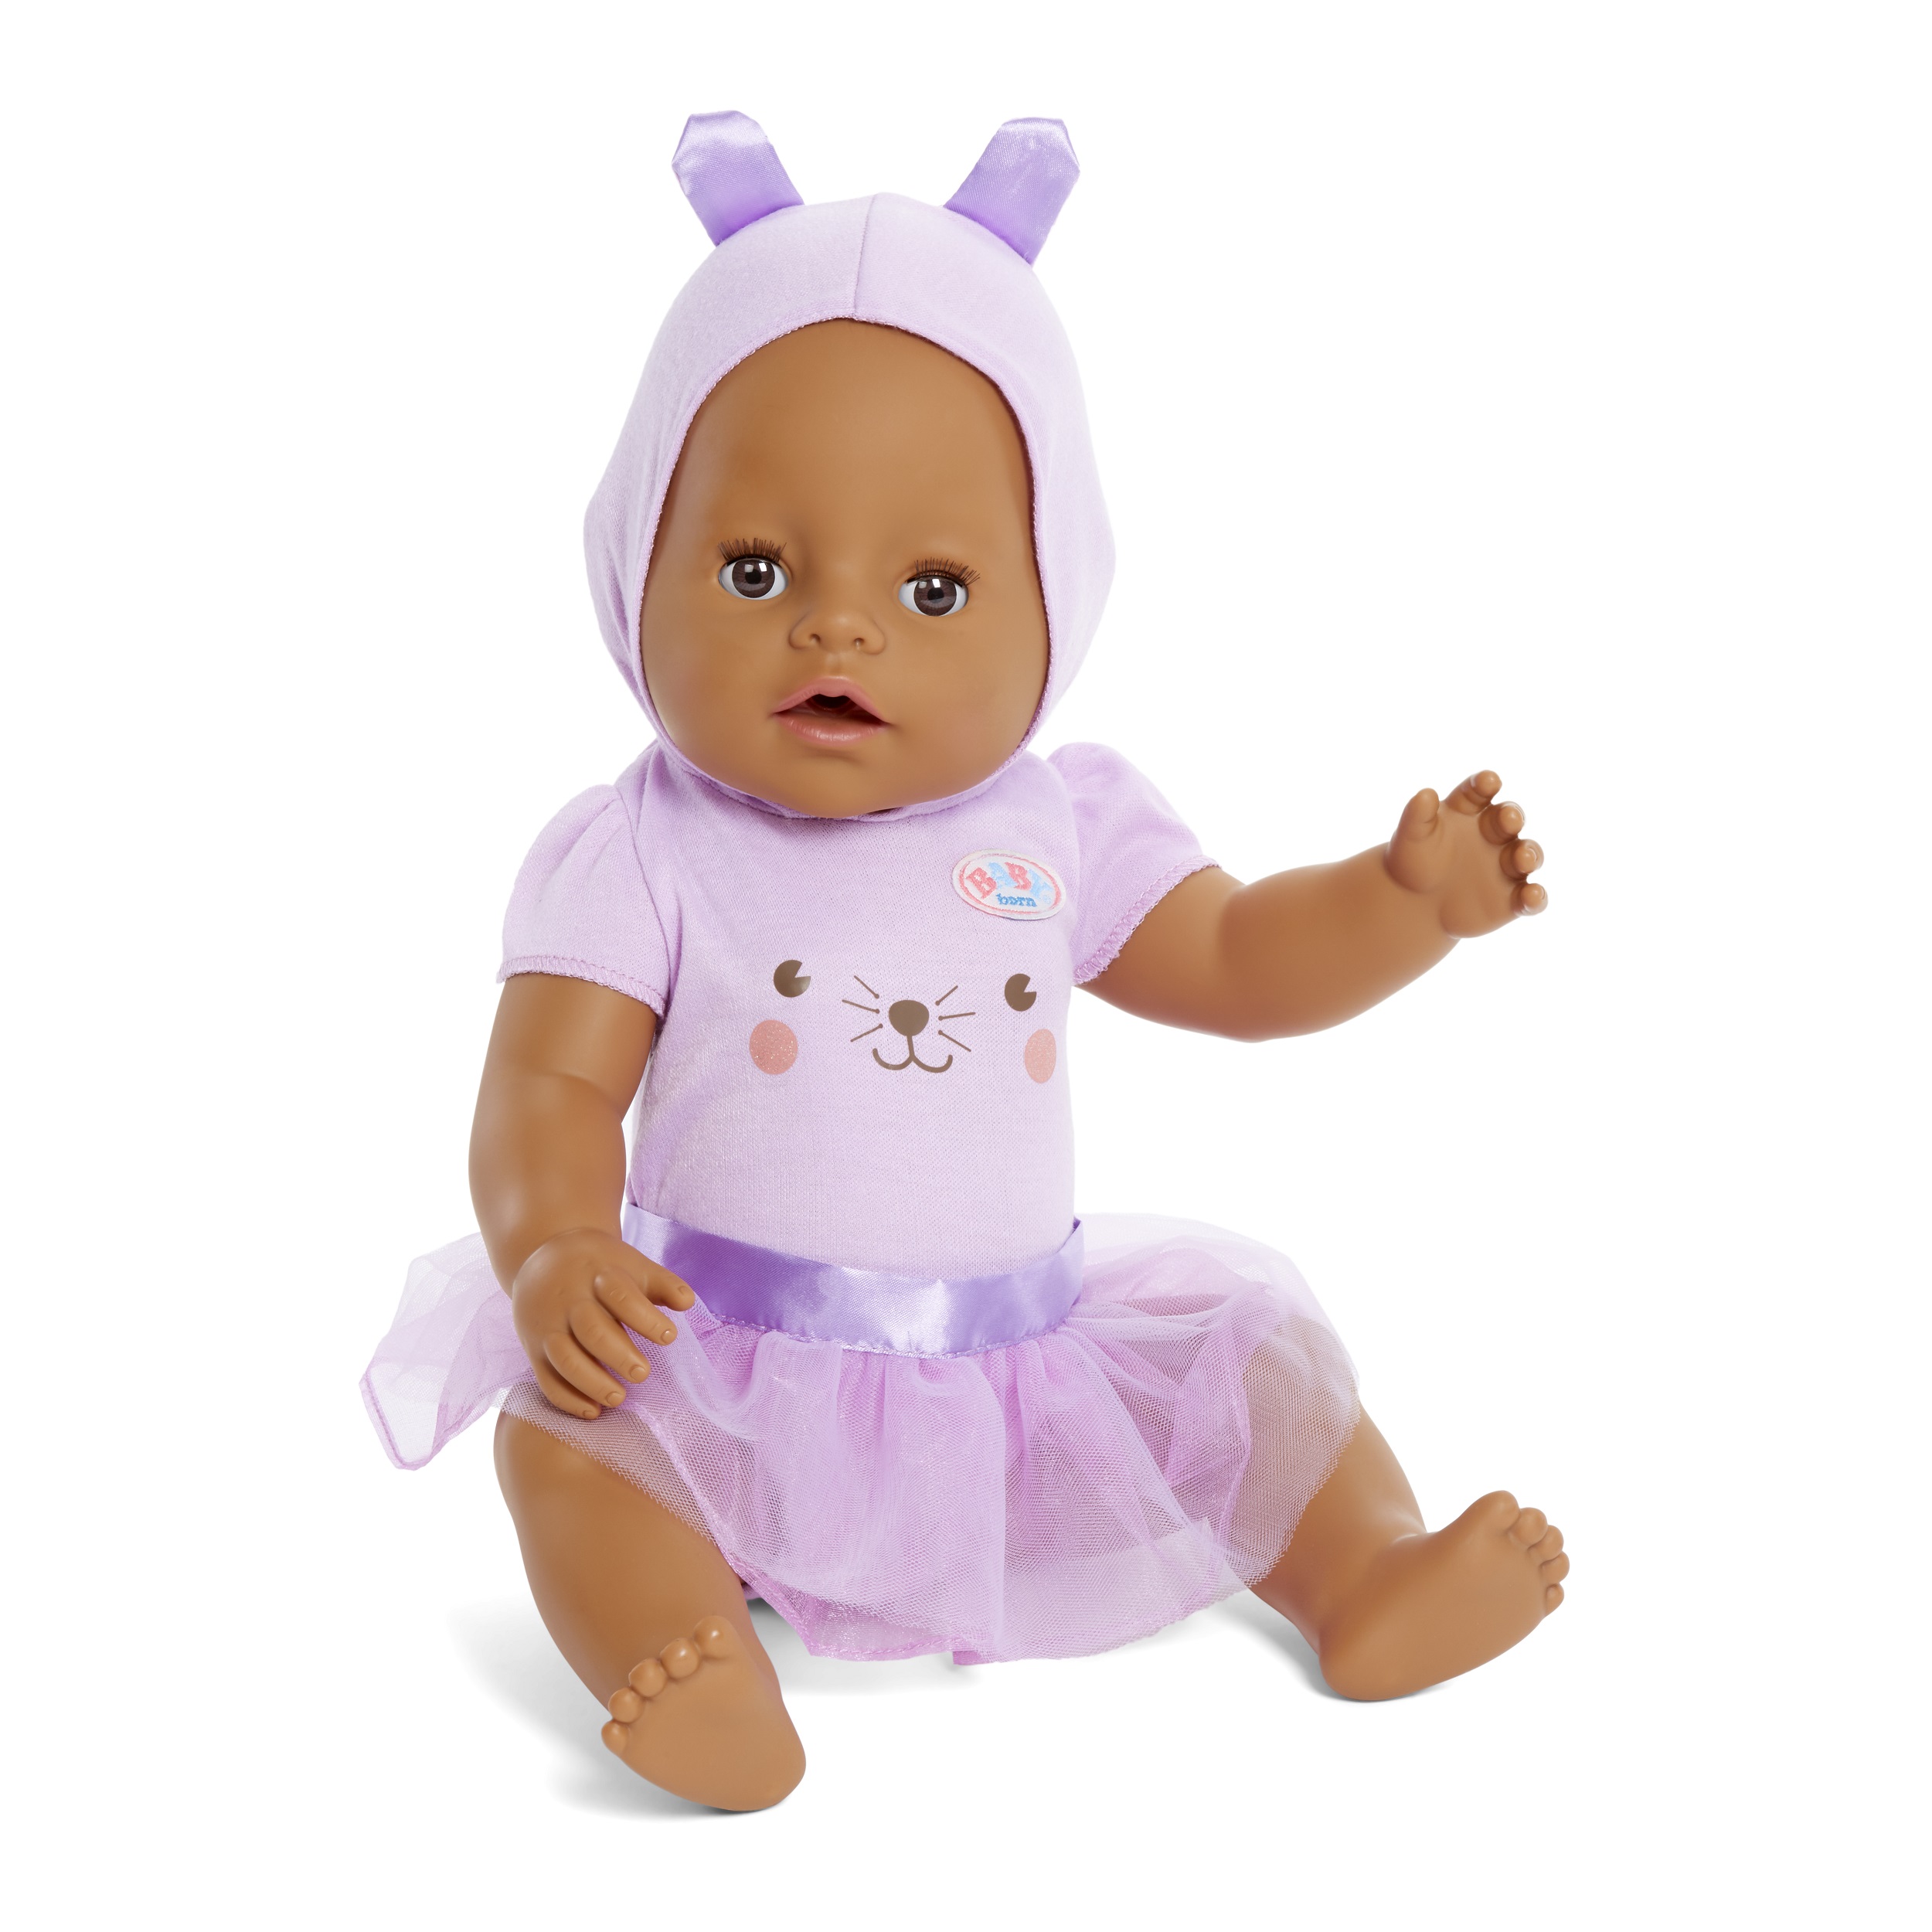 Baby born Interactive Doll Brown Eyes with 9 Ways to Nurture, Eats, Drinks, Cries, Sleeps, Bathes, and Wets - image 4 of 6